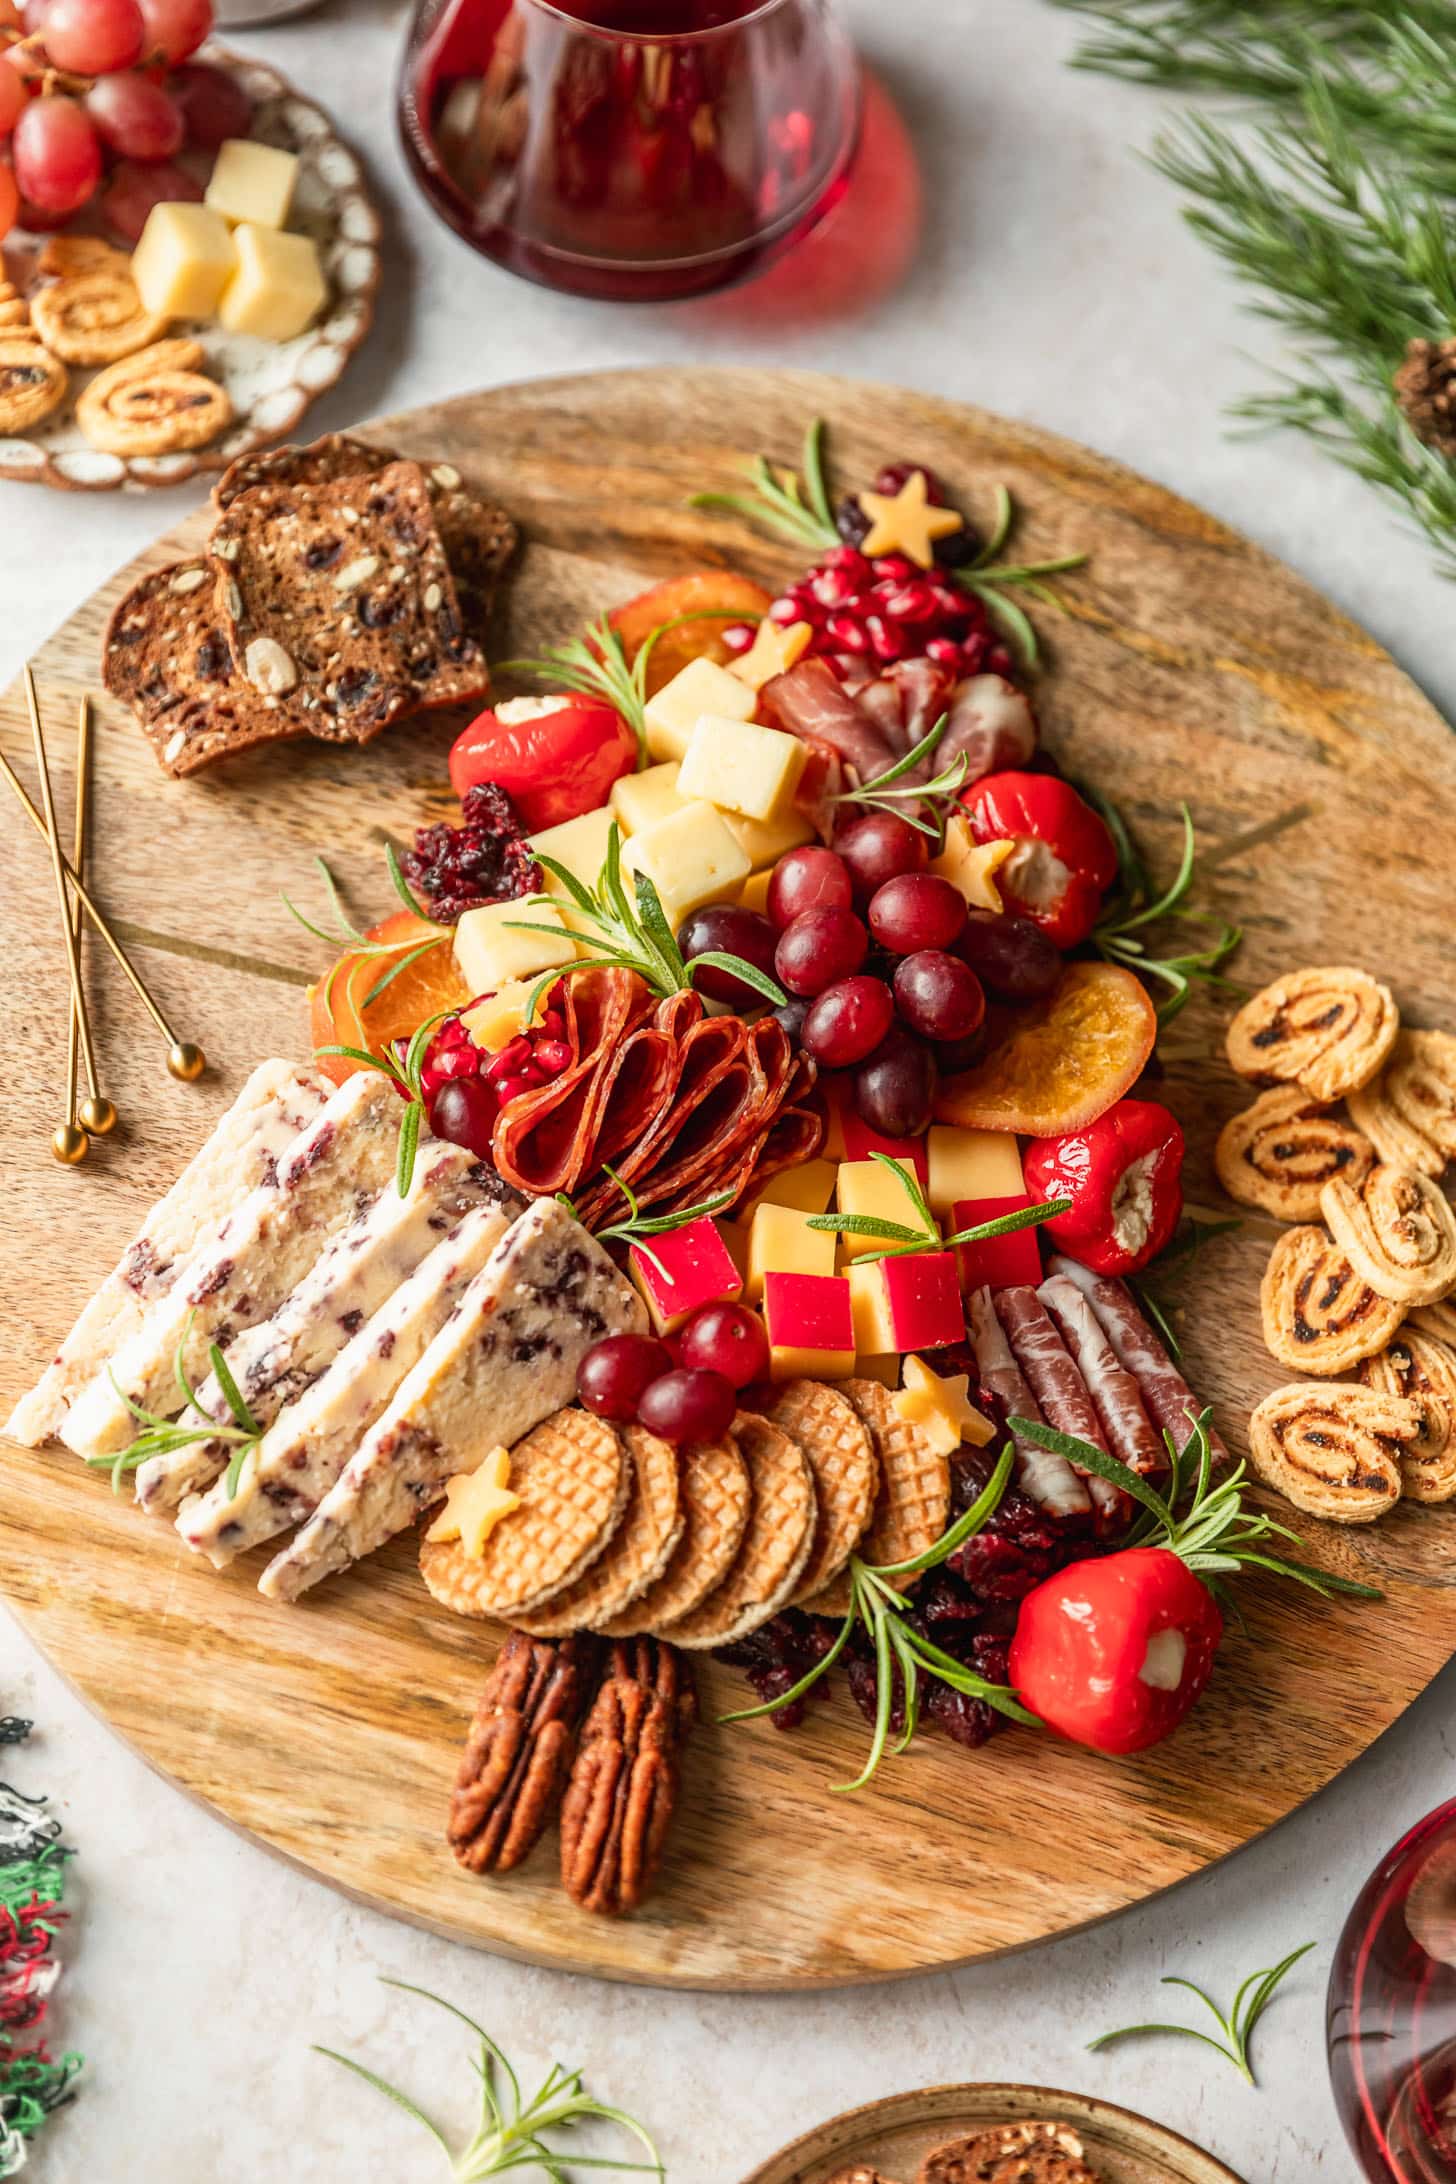 A Christmas tree charcuterie board on a tan counter next to glasses of red wine, garland, and white plates of crackers and fruit.